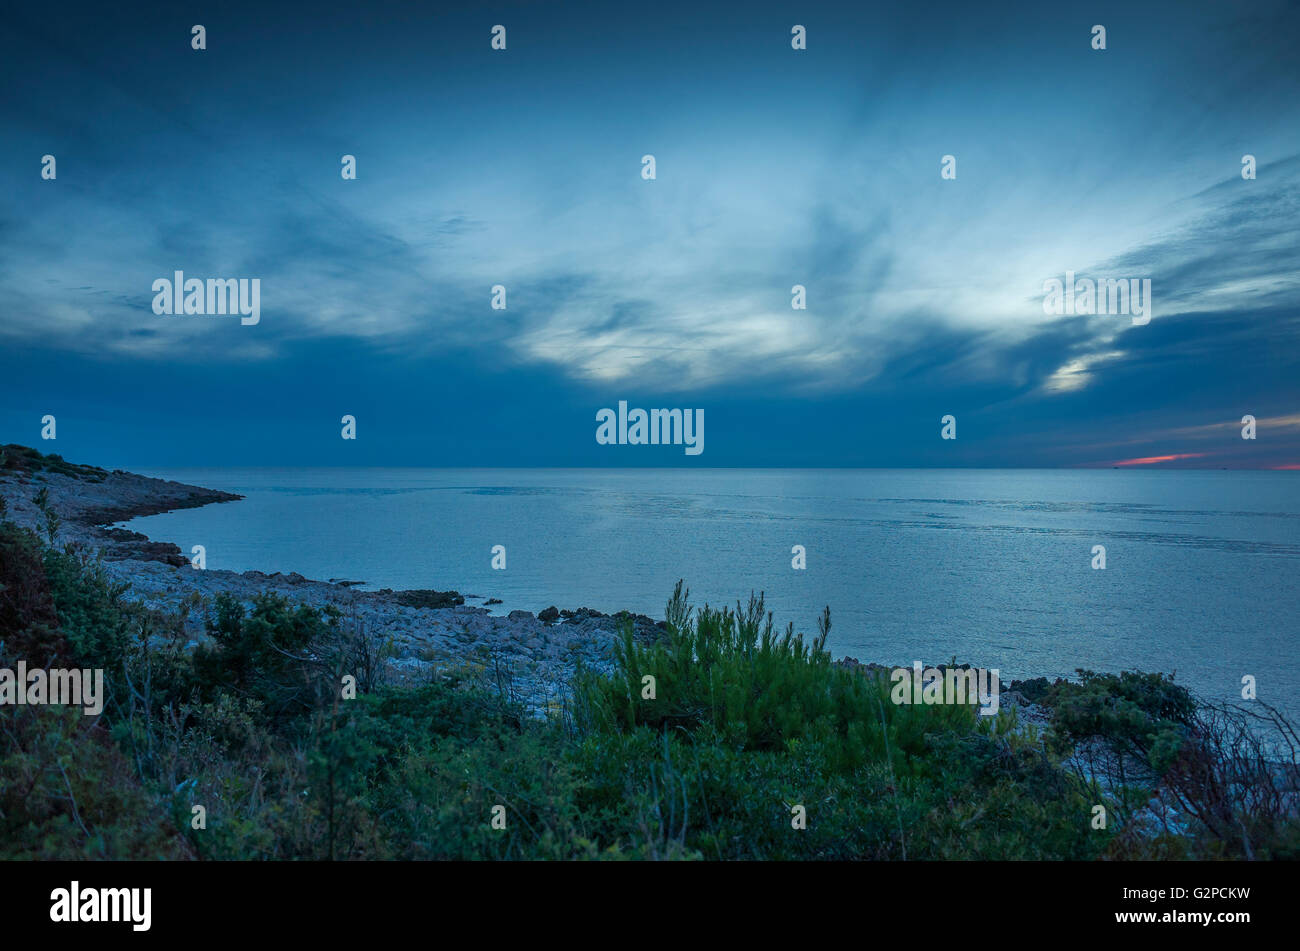 Razanj Croatia Europe. Landscape and nature photo. Adriatic Sea at dawn after sunset. Calm blue warm summer evening with beautiful colors and tones. Stock Photo